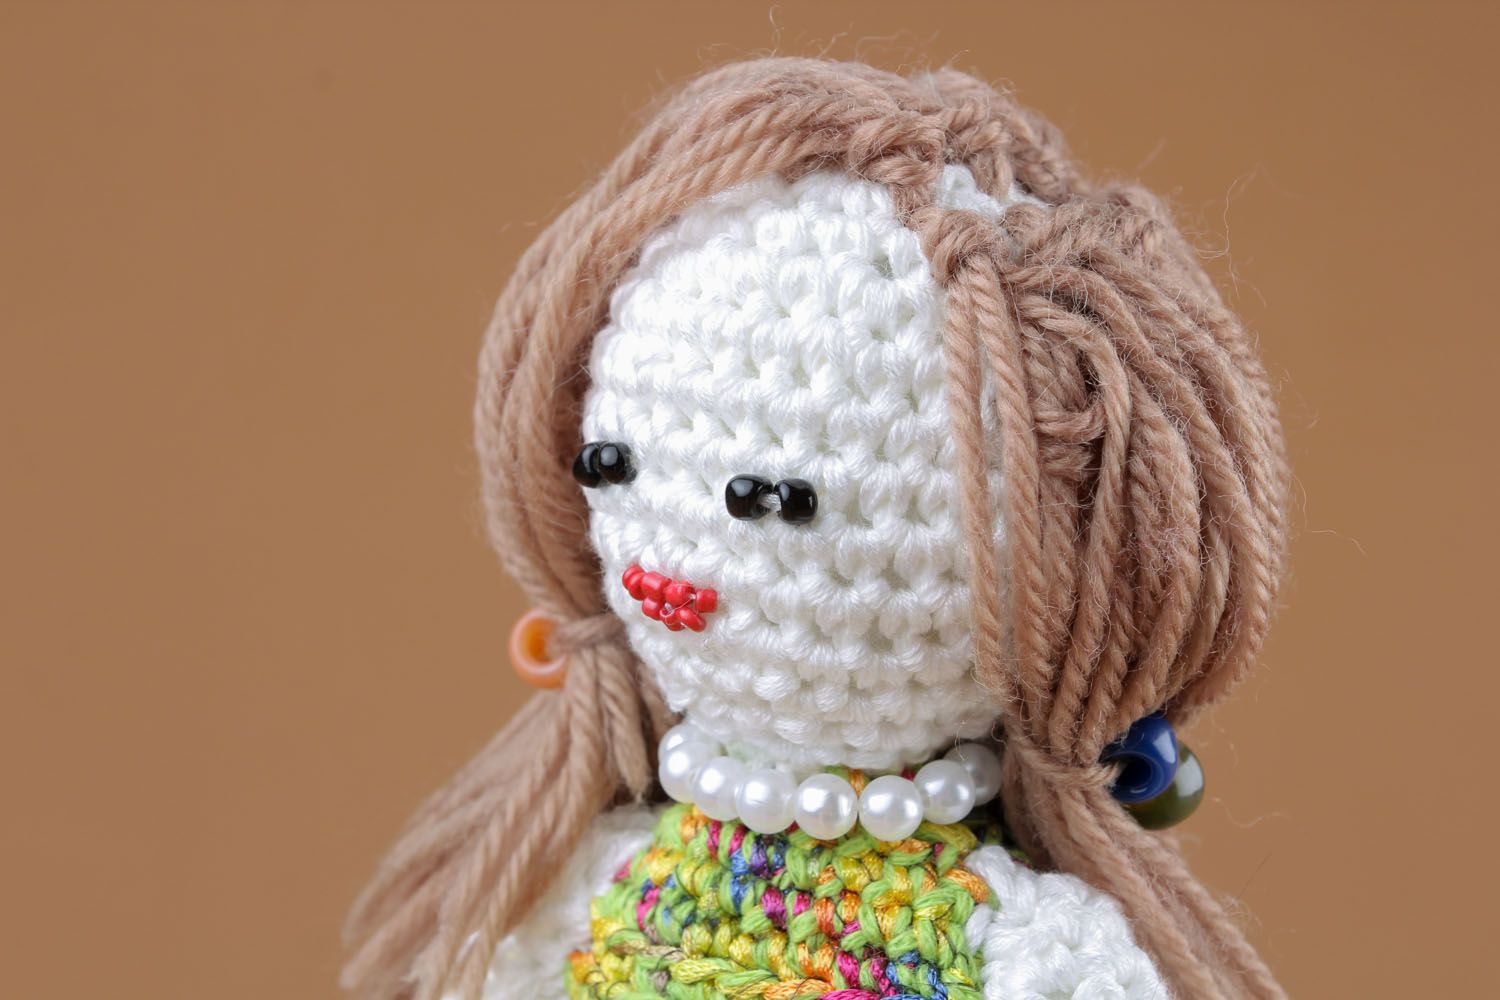 Crocheted author's doll photo 3